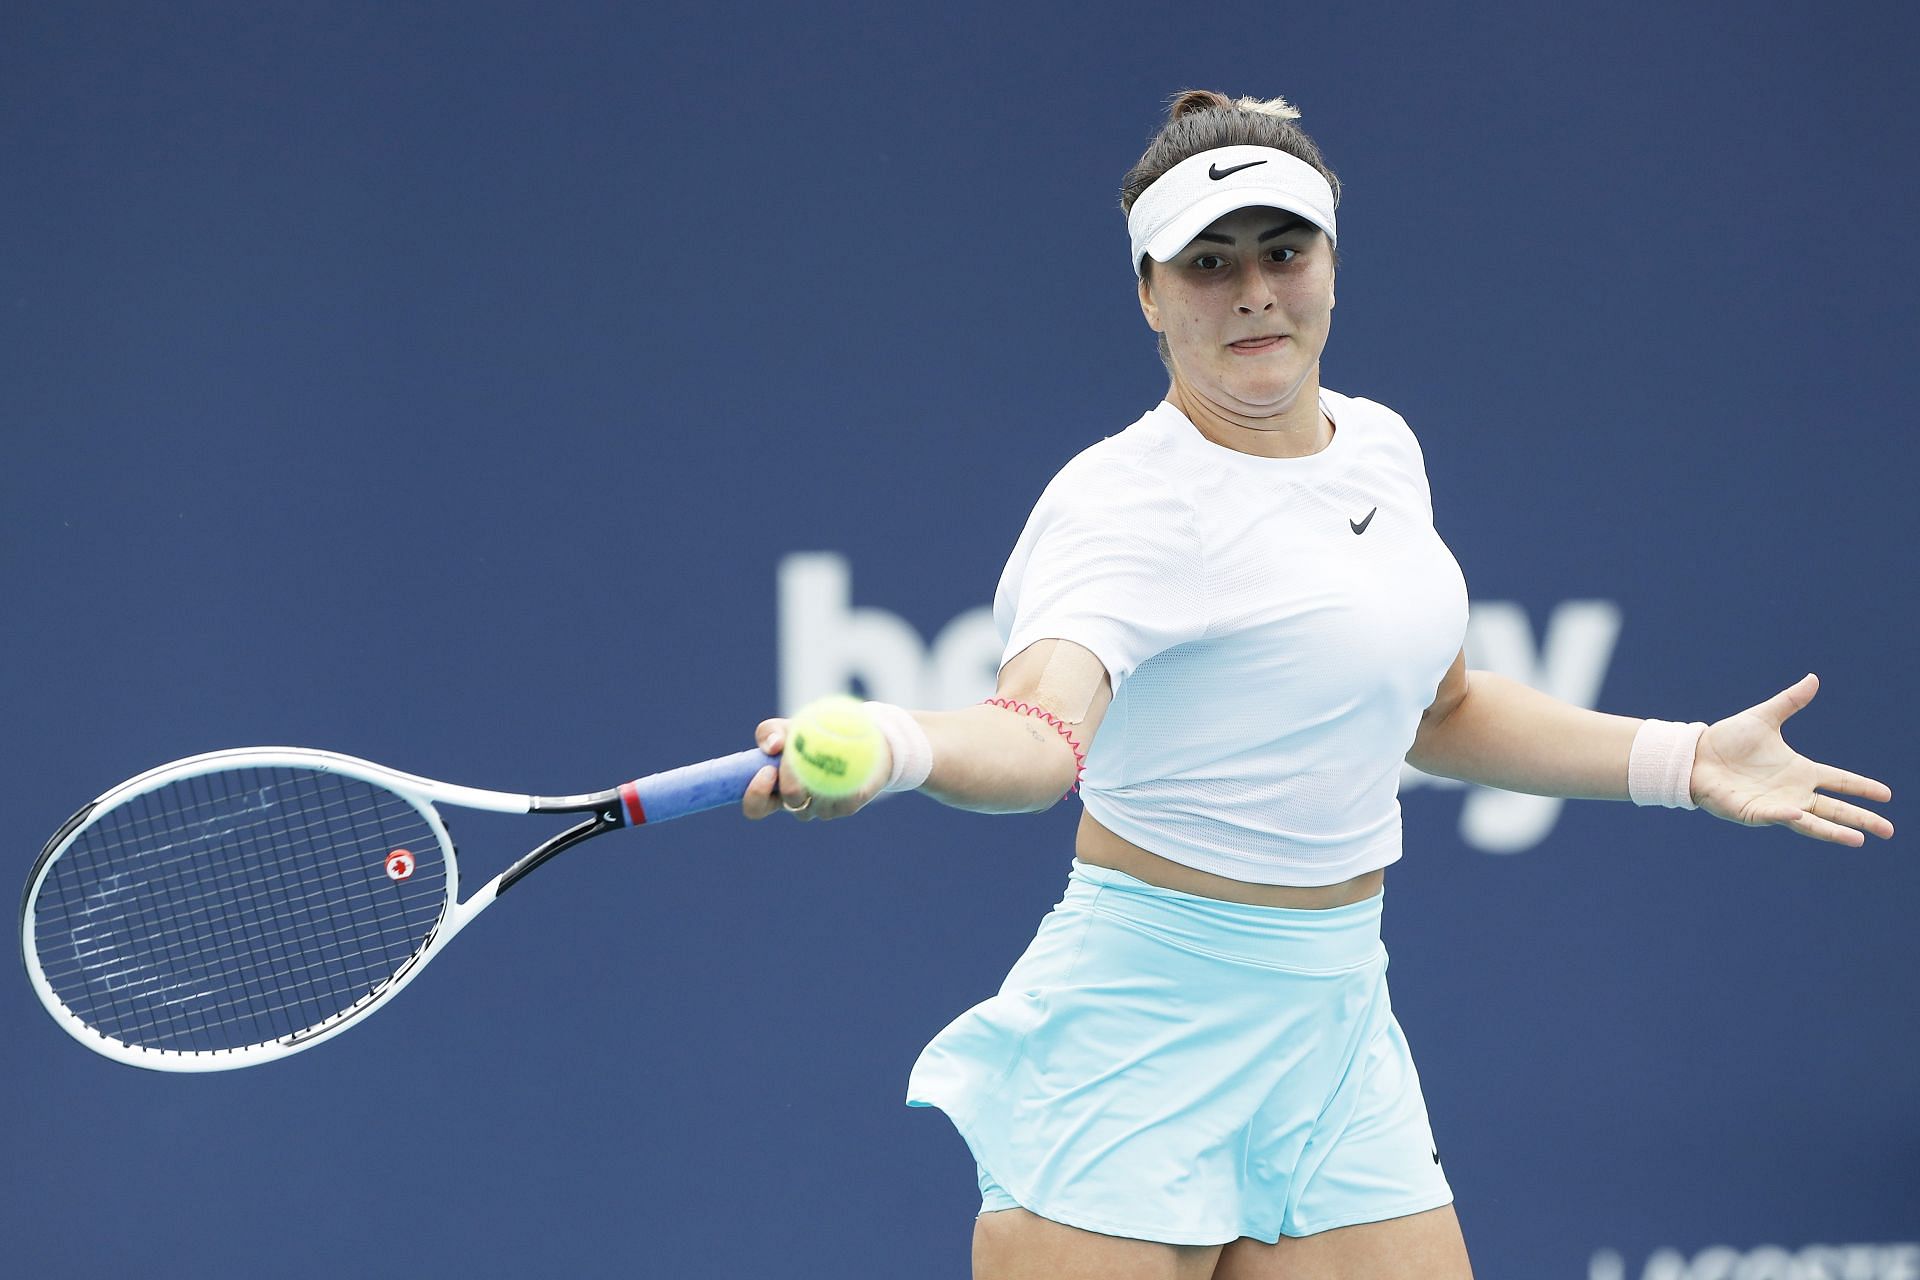 Bianca Andreescu will unfortunately hit the triple digit mark in terms of ranking after the 2022 Miami Open comes to a close